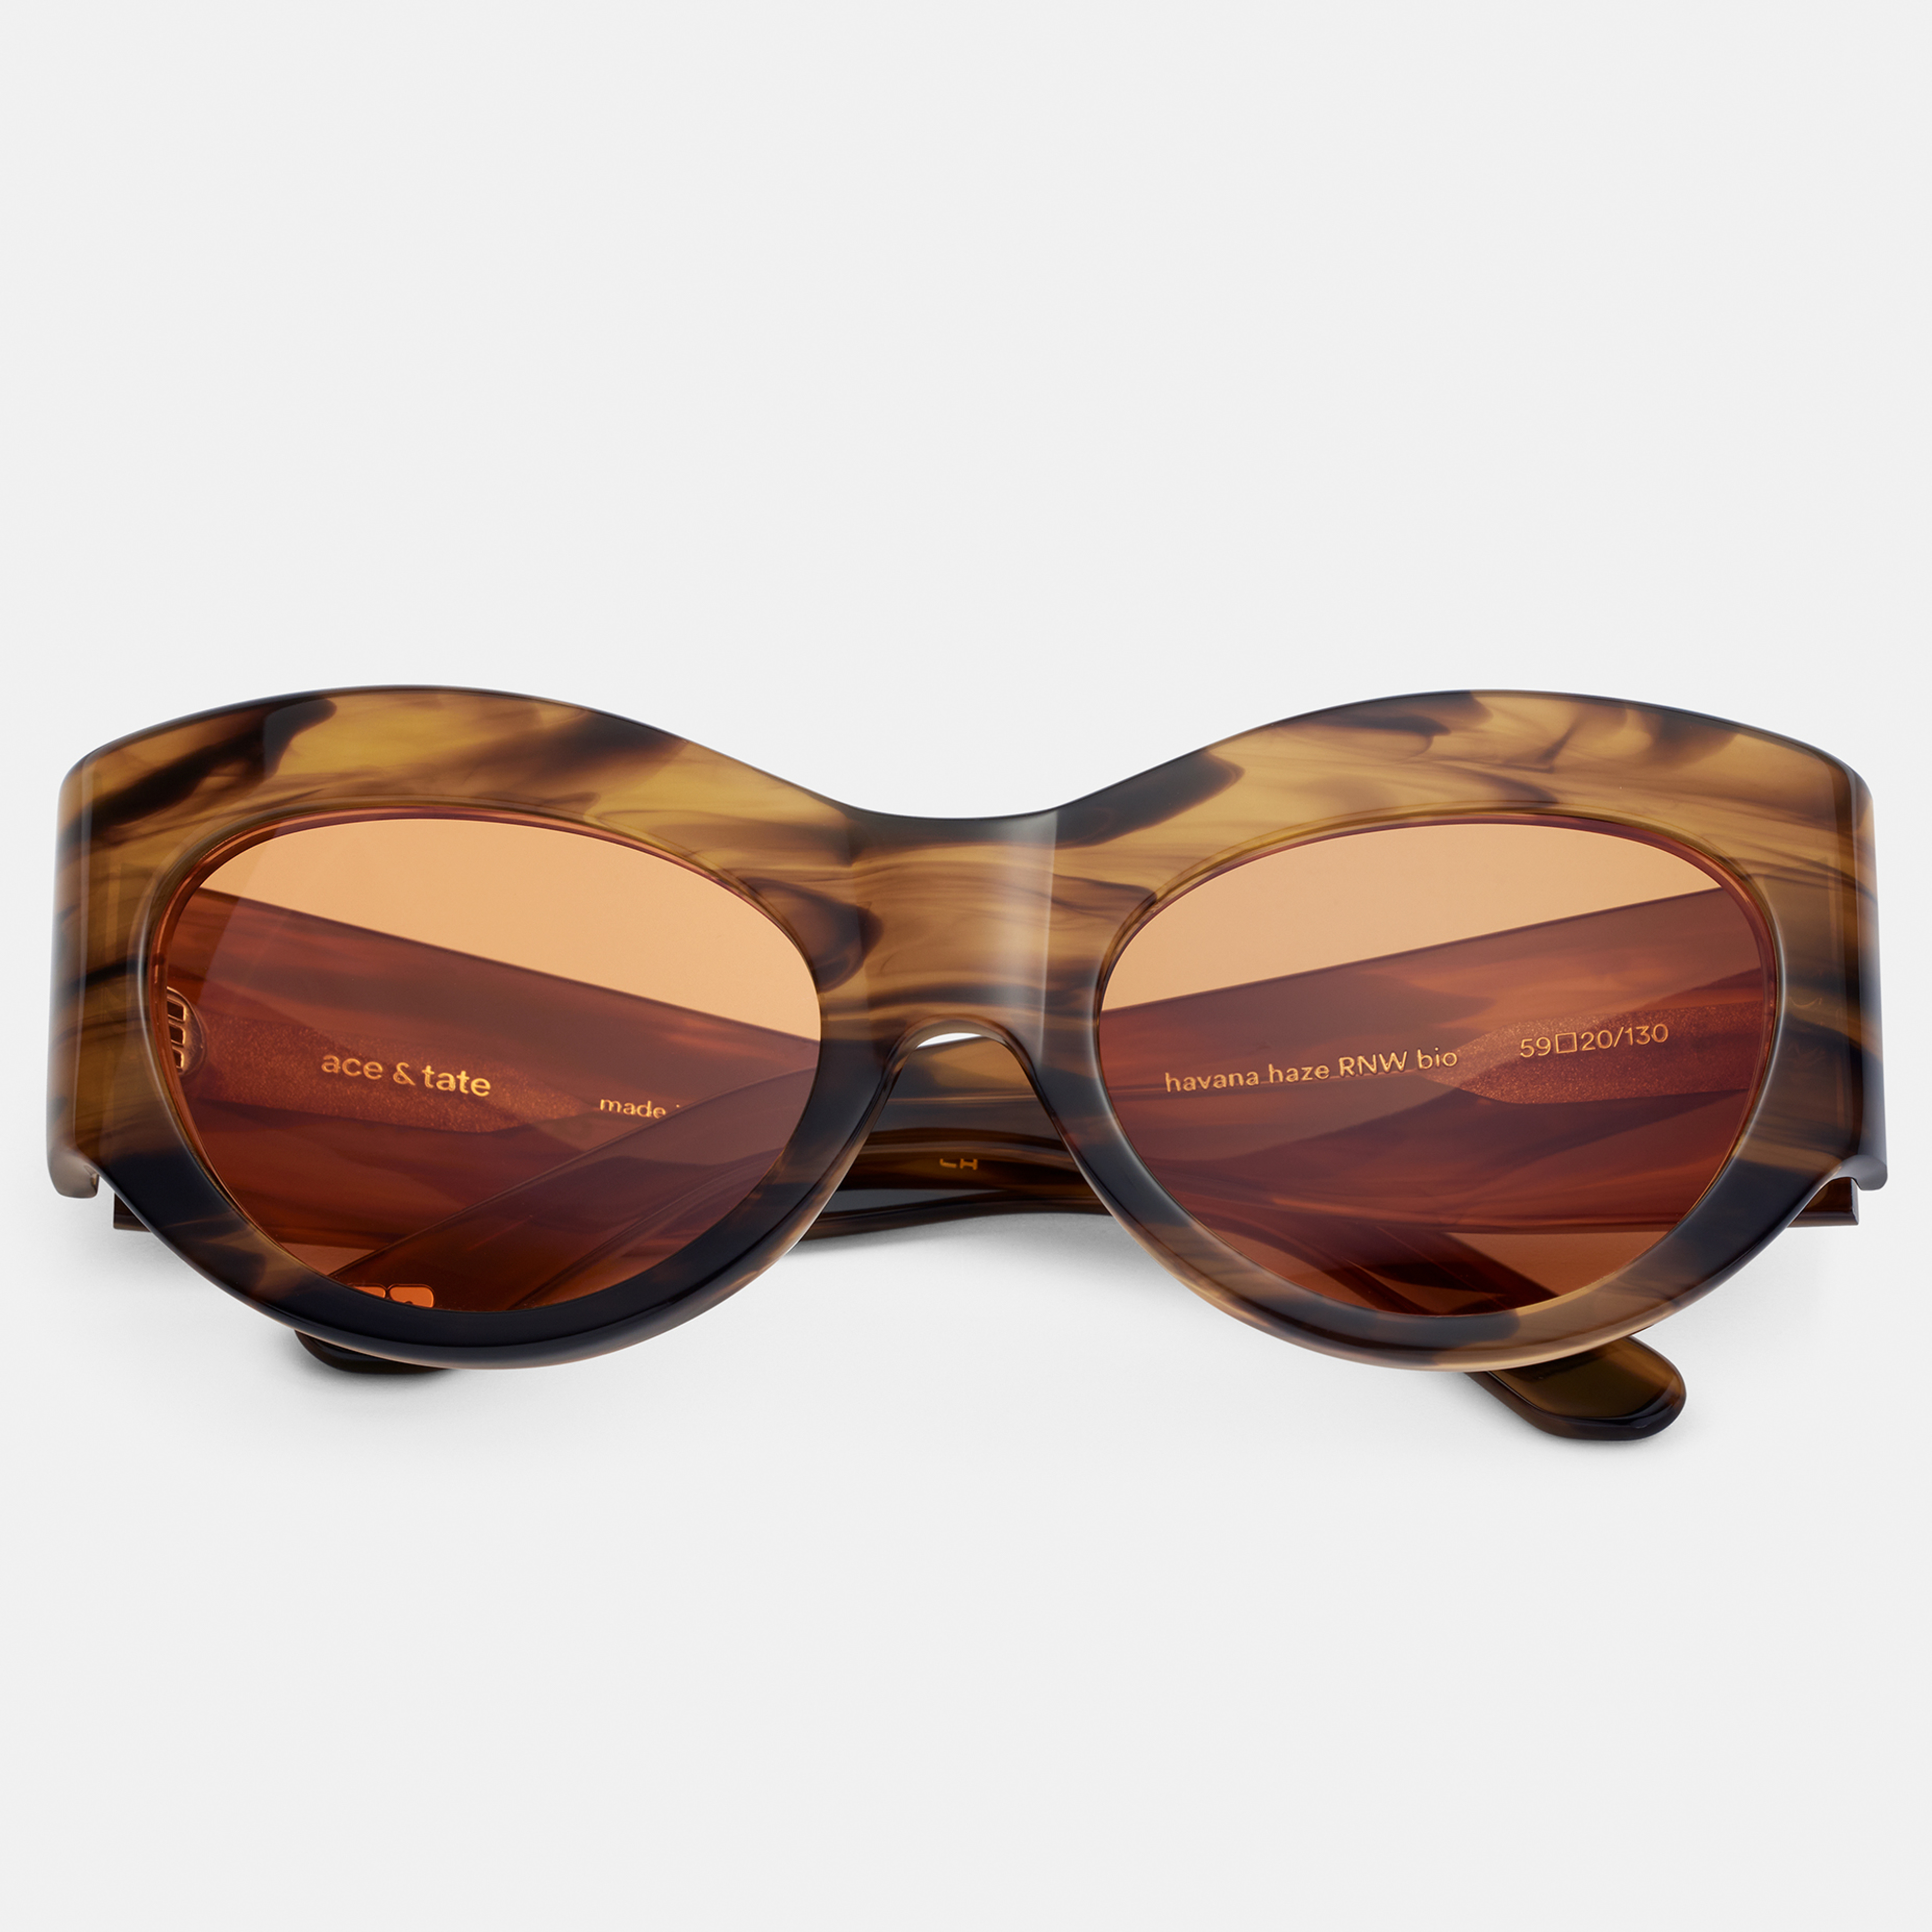 Ace & Tate Solaires | oval Renew bio-acétate in Marron, tortoise